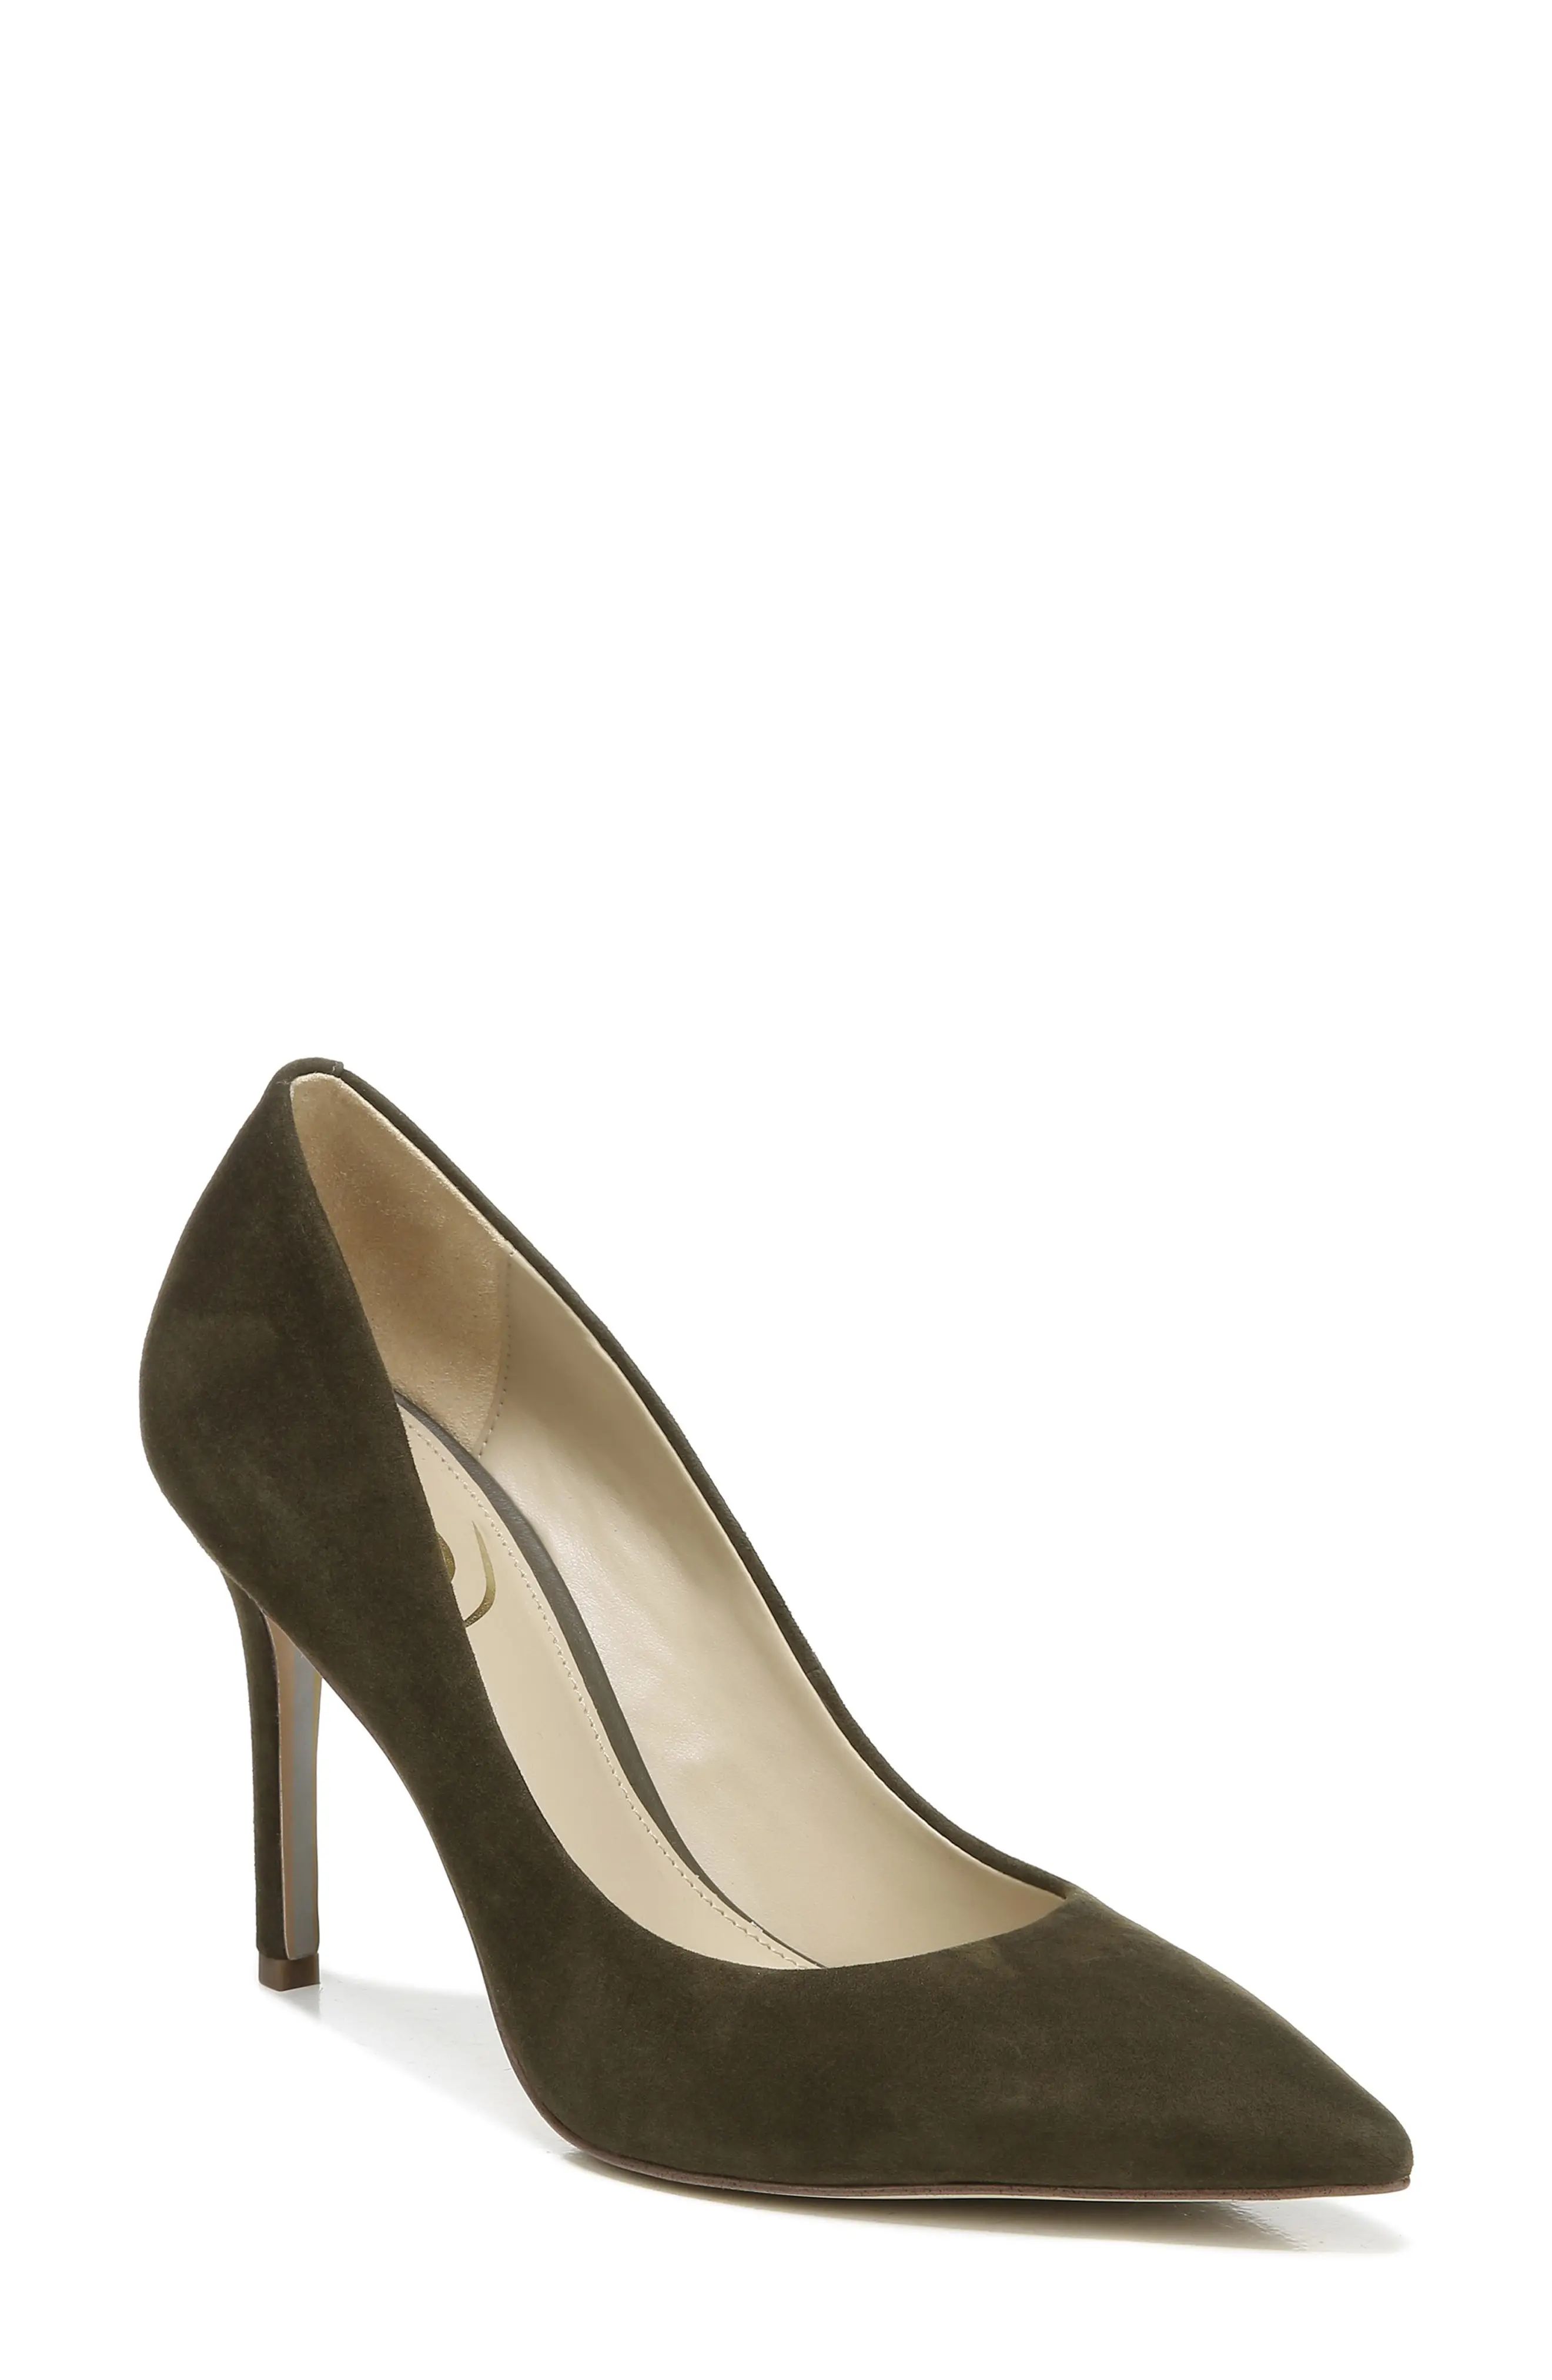 Sam Edelman Hazel Pointed Toe Pump in Military Green Suede at Nordstrom, Size 6 | Nordstrom